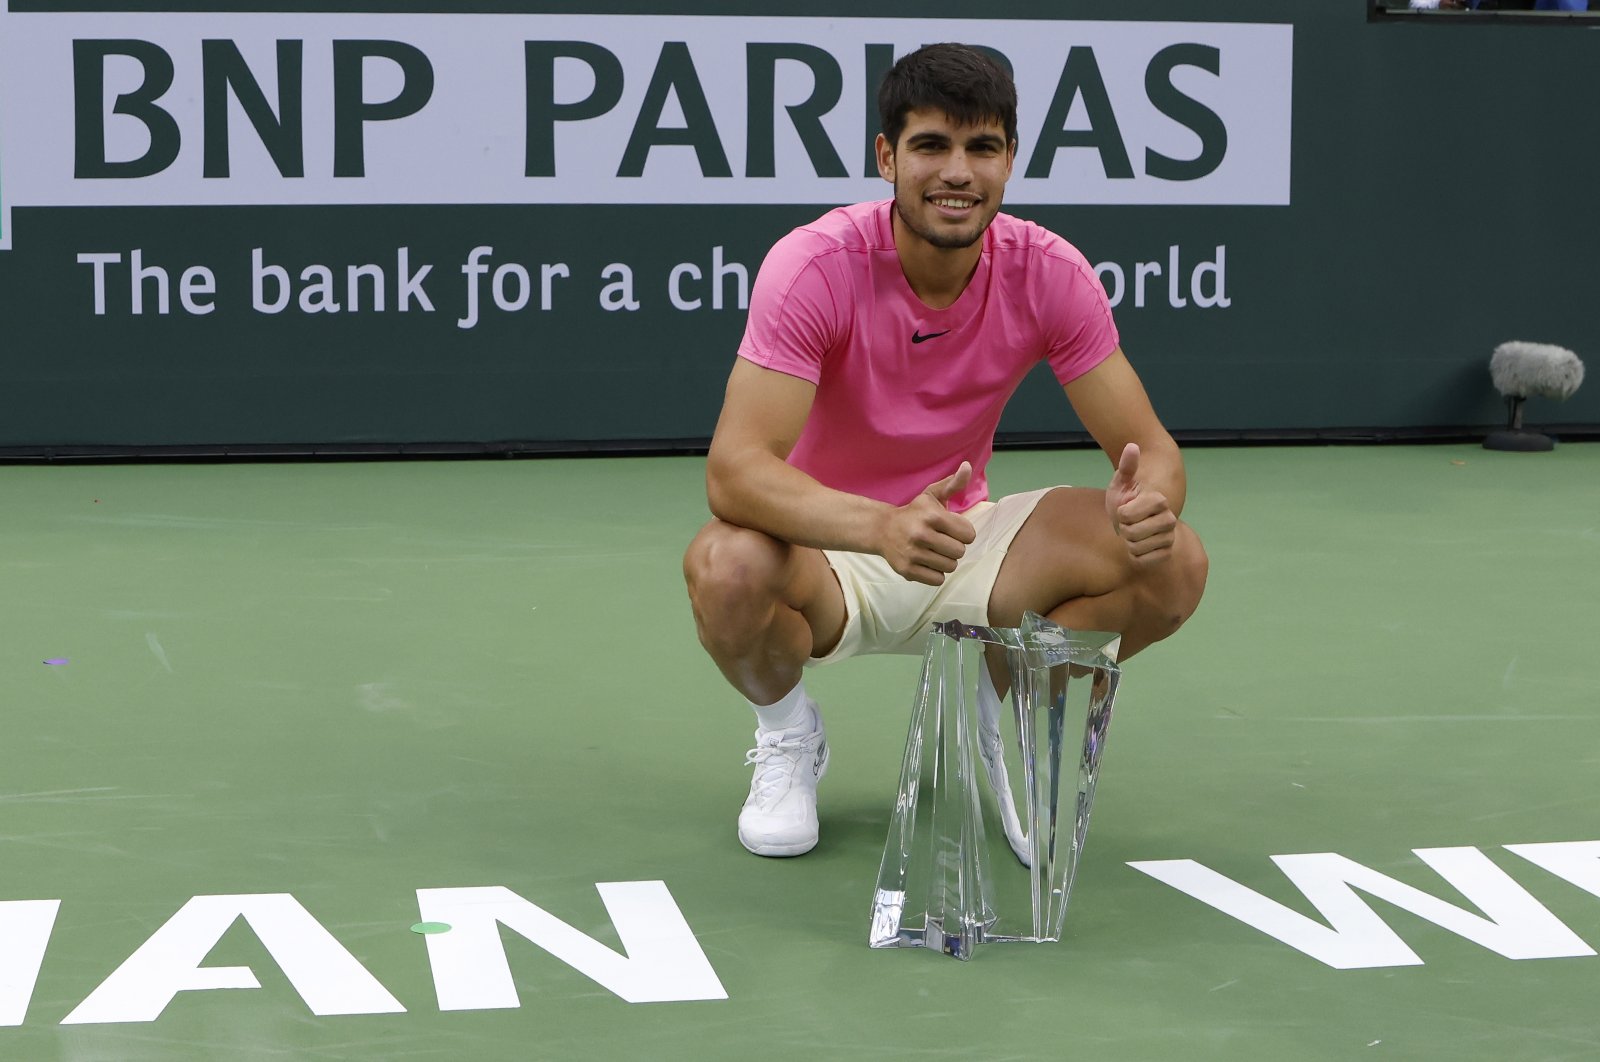 Spain&#039;s Carlos Alcaraz poses with the championship trophy after defeating Russia&#039;s Daniil Medvedev during the men&#039;s finals of the BNP Paribas Open tennis tournament at the Indian Wells Tennis Garden, Indian Wells, California, US., March 19, 2023. (EPA Photo)